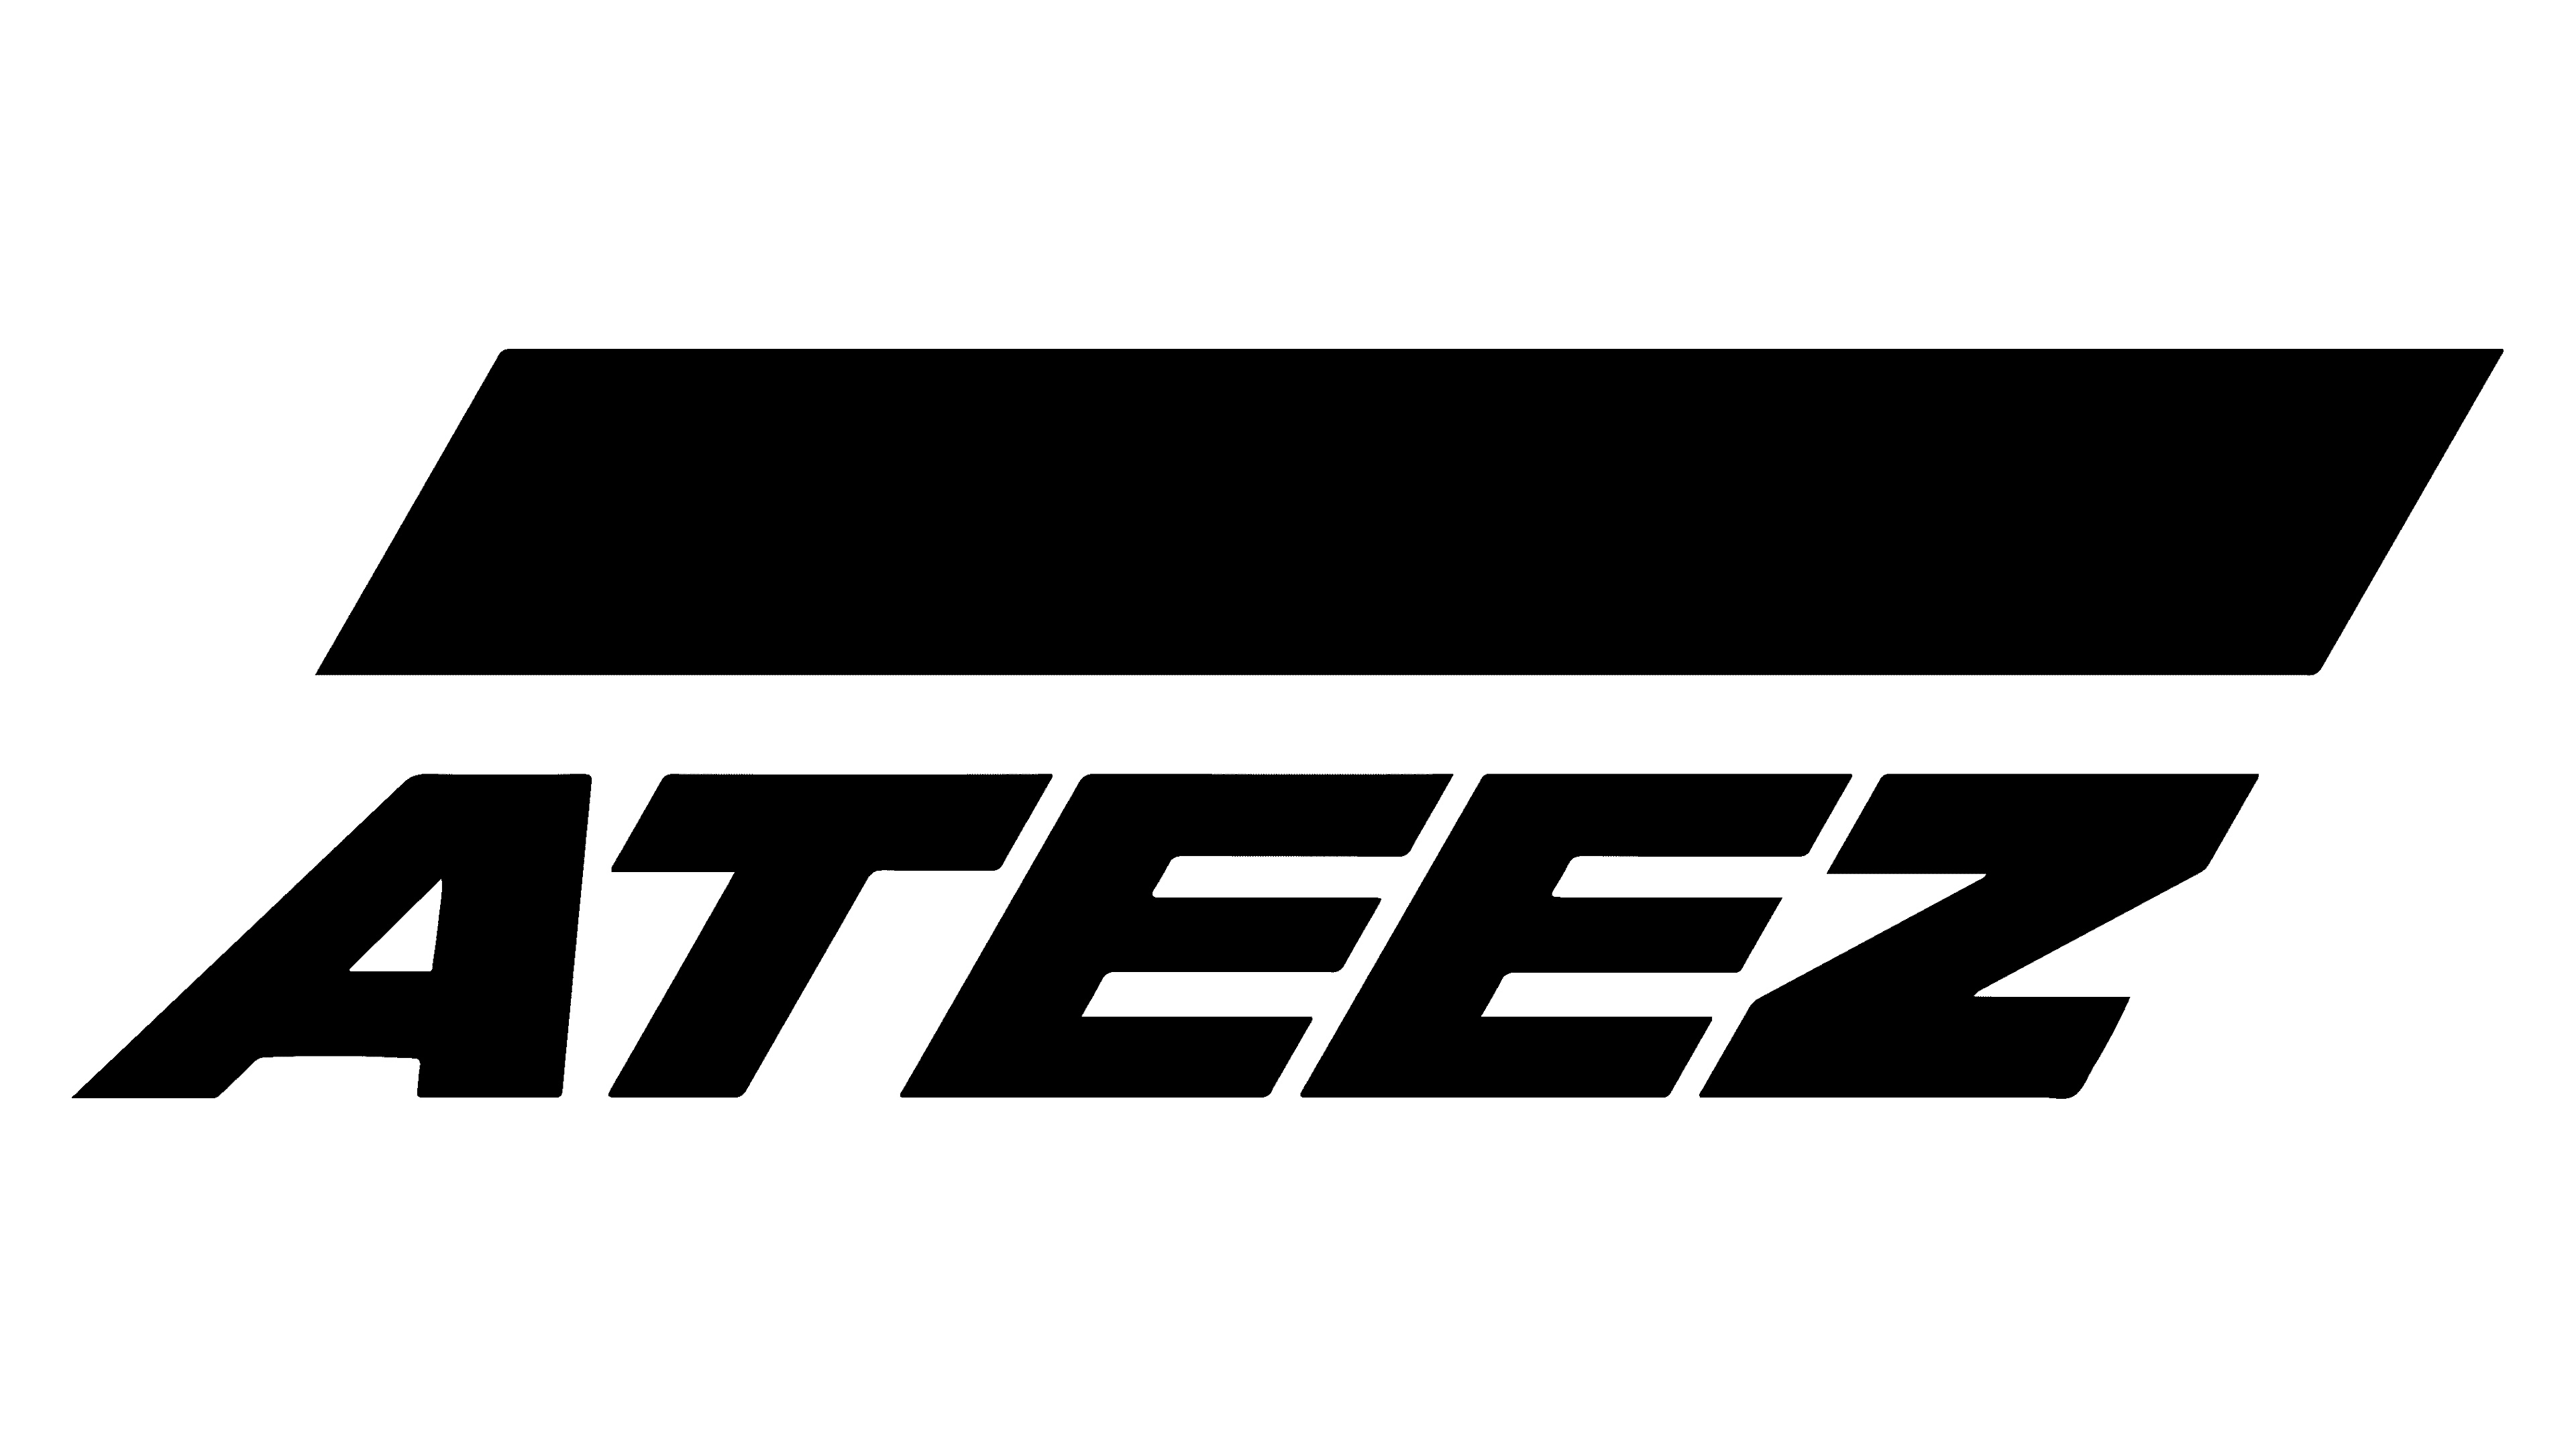 ATEEZ, Logo and symbol meaning, PNG brand, 3840x2160 4K Desktop